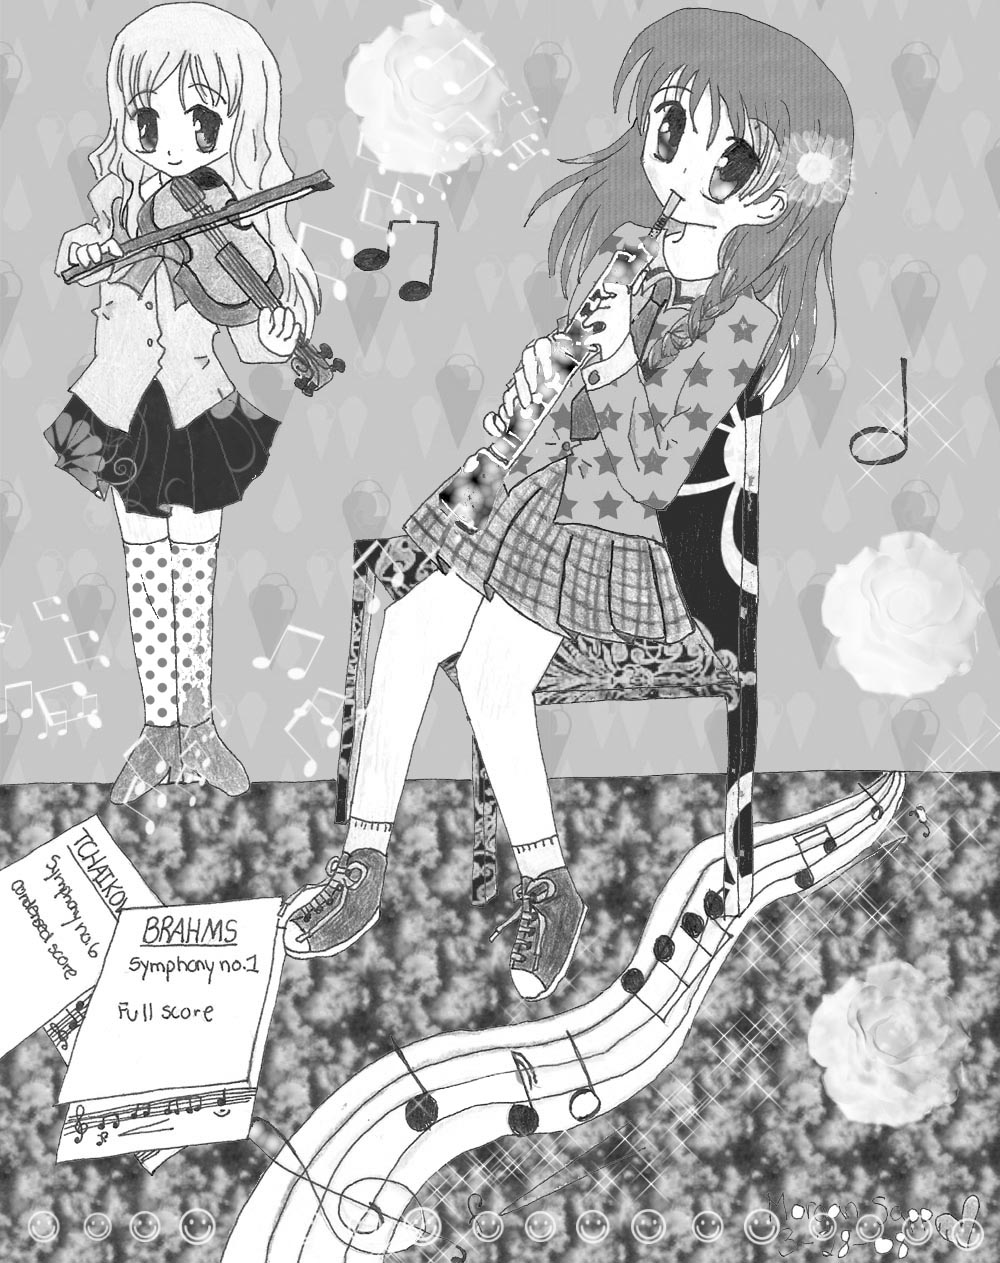 Music Girls ~comic book edit by Cowharvest